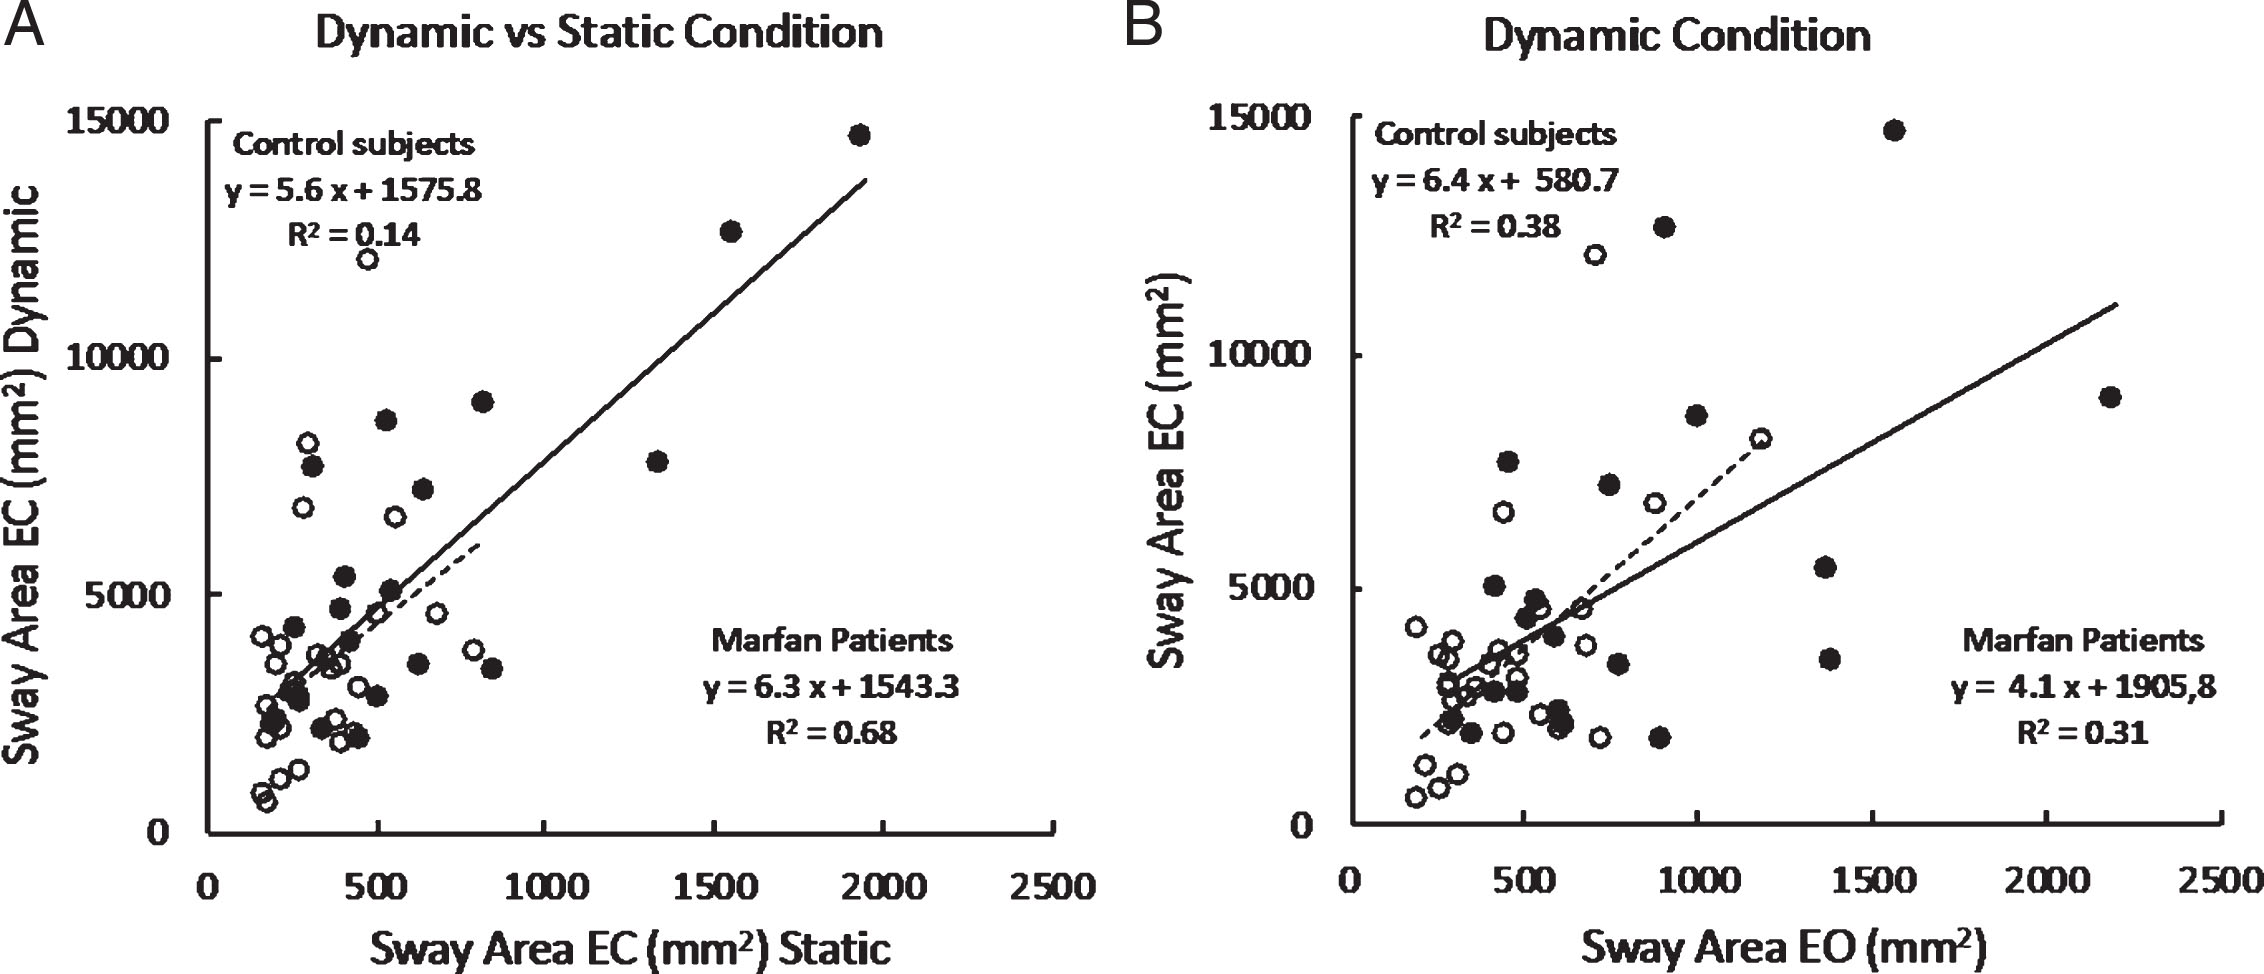 A. Mean individual Sway Area (EC) values recorded under dynamic condition (vertical axis) are plotted against those recorded under static condition (horizontal axis) in the two groups (filled circles, patients with MFS; open circles, Control Subjects). B. Sway area (mm2) under dynamic condition only; EC data are plotted against EO.